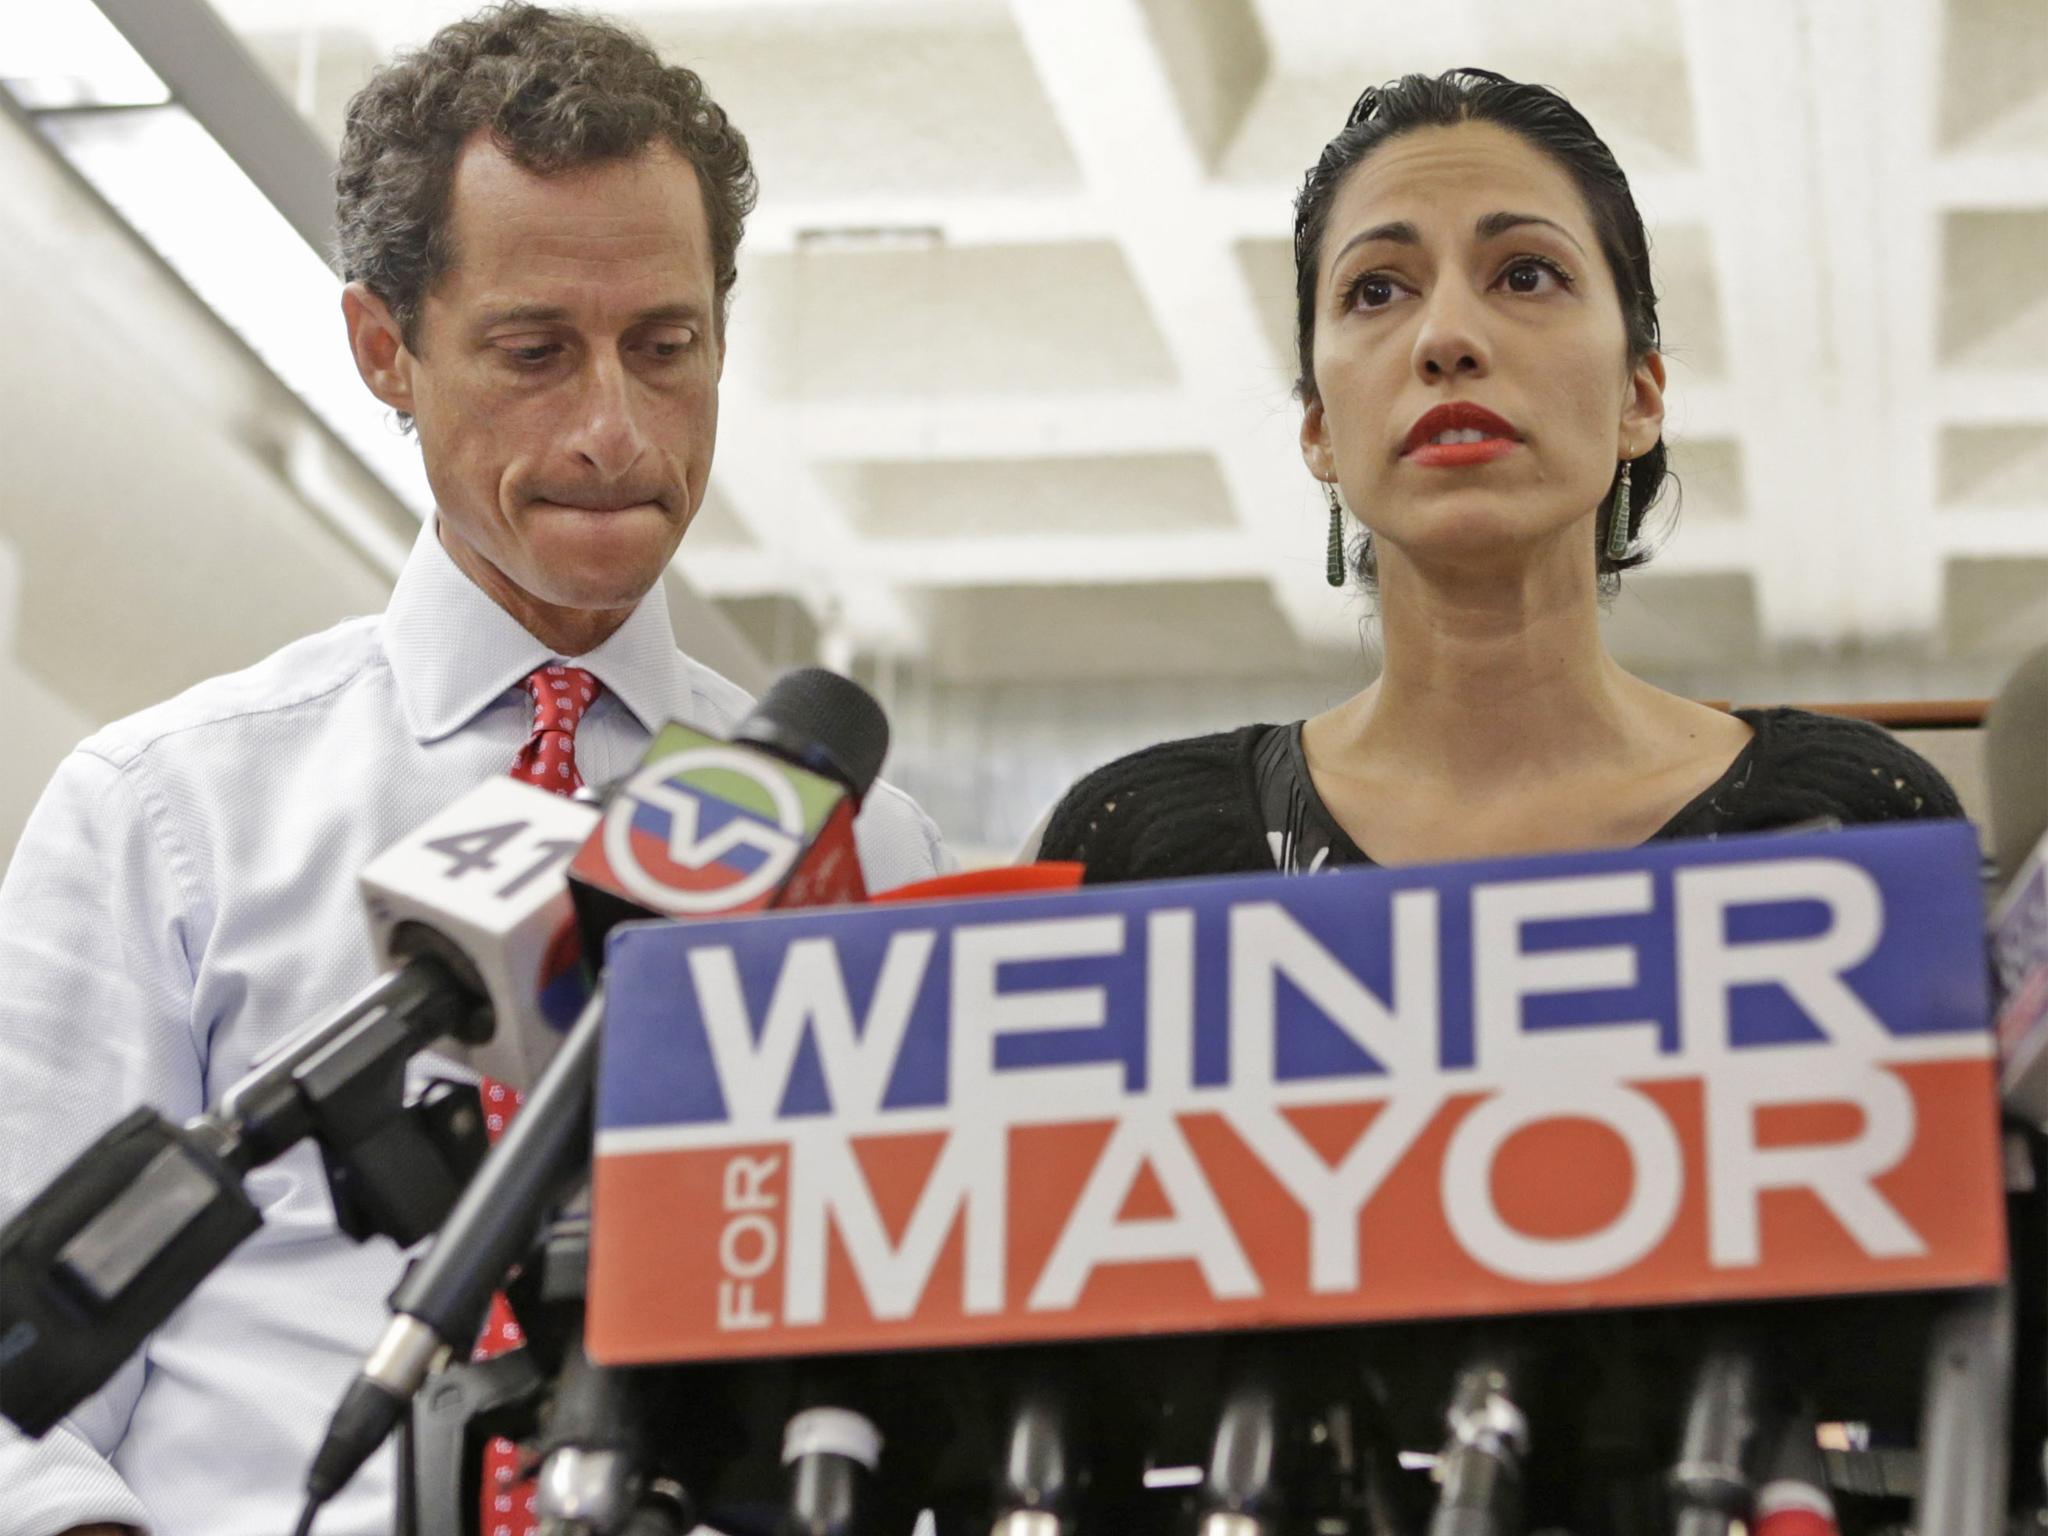 Anthony Weiner, with wife and Clinton aide Huma Abedin at a press conference, sent a lewd text message to a 15-year-old girl AP